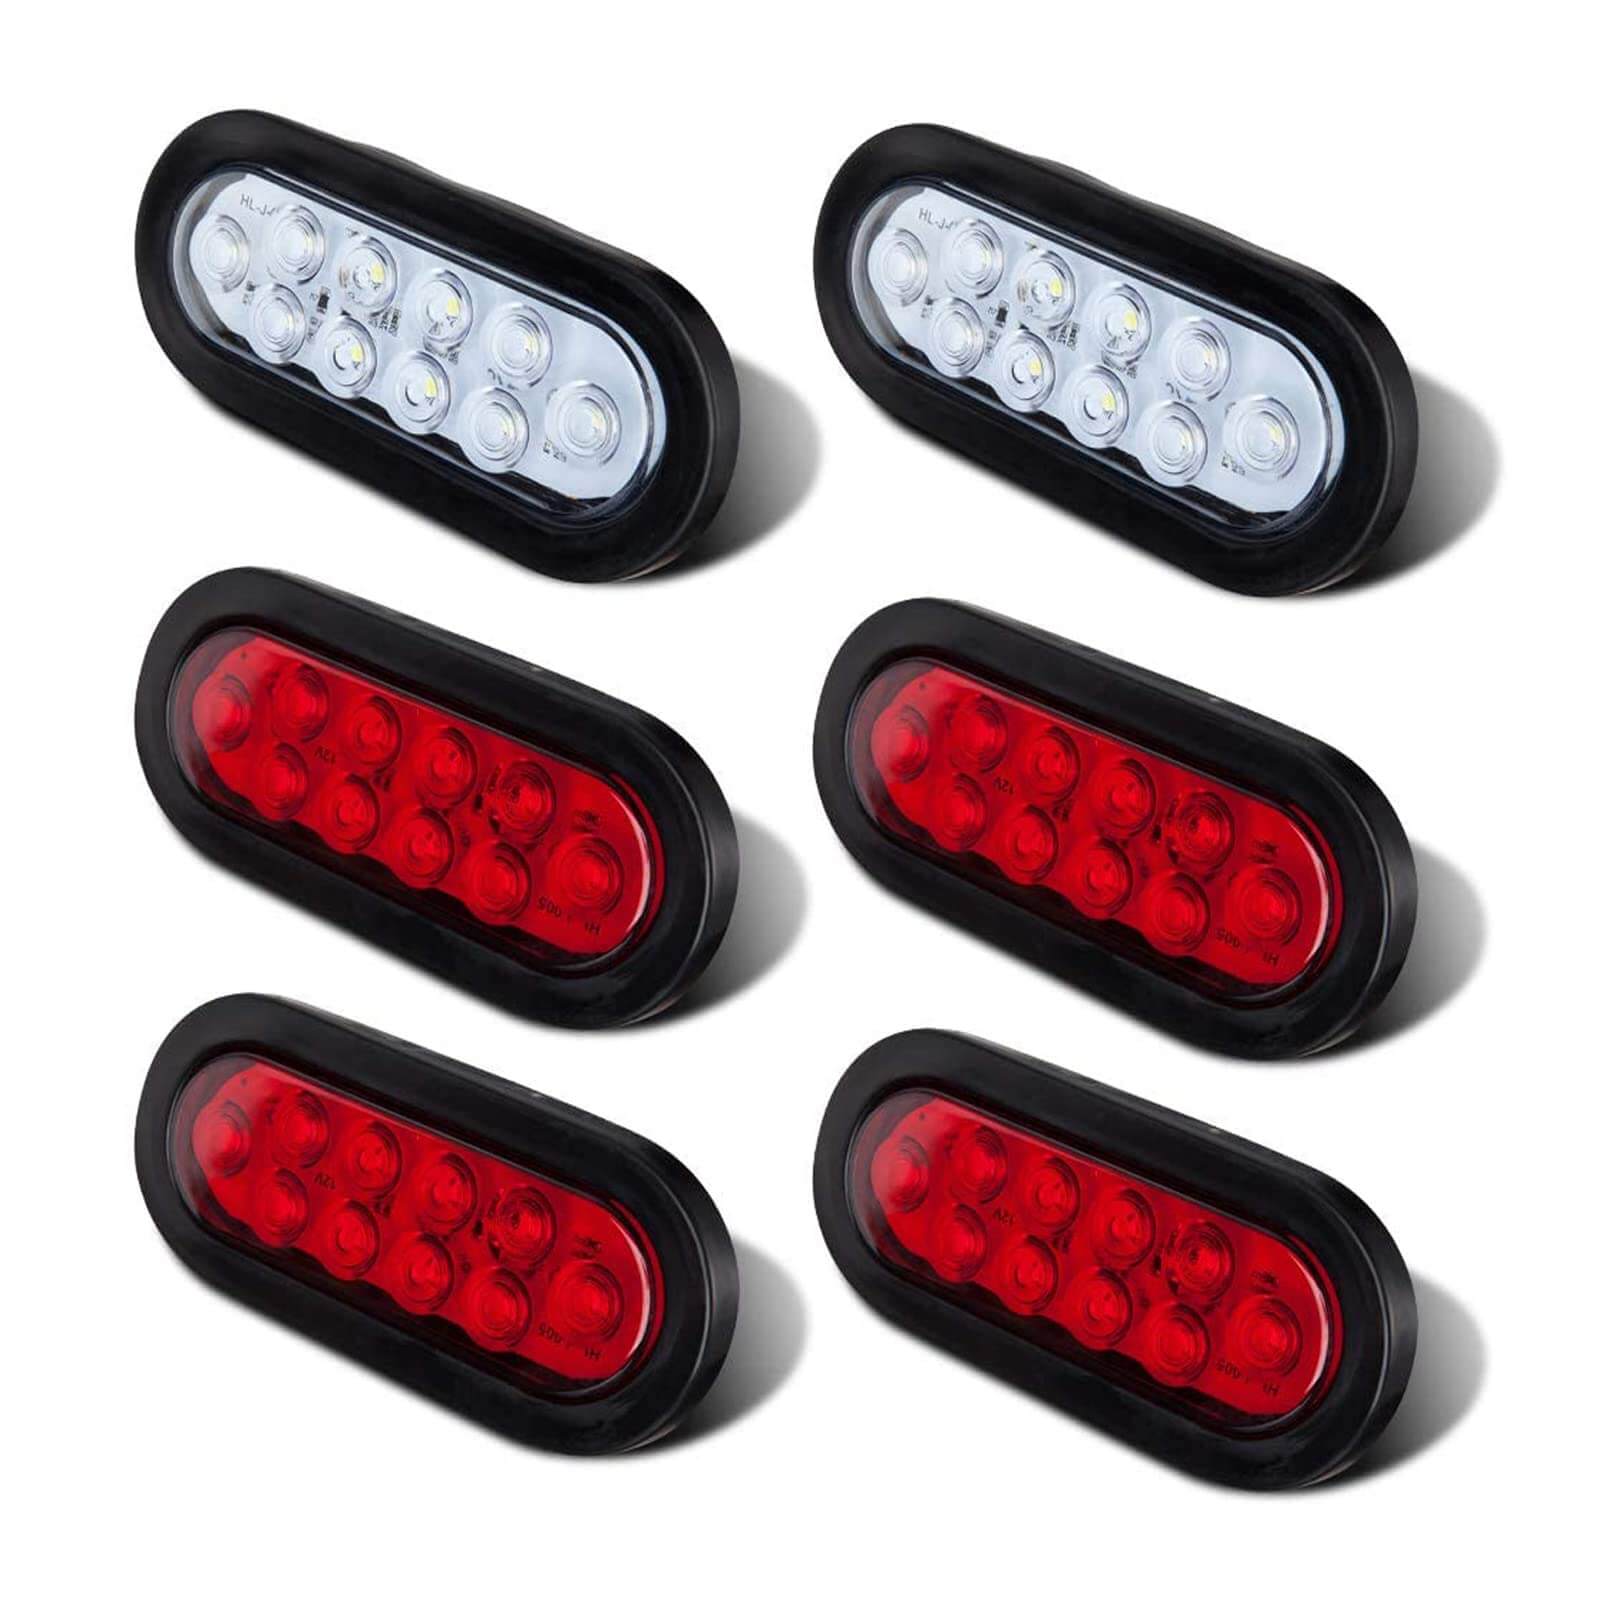 6 Inch Oval 4 RED 2 White LED Stop/Turn/Tail Lights